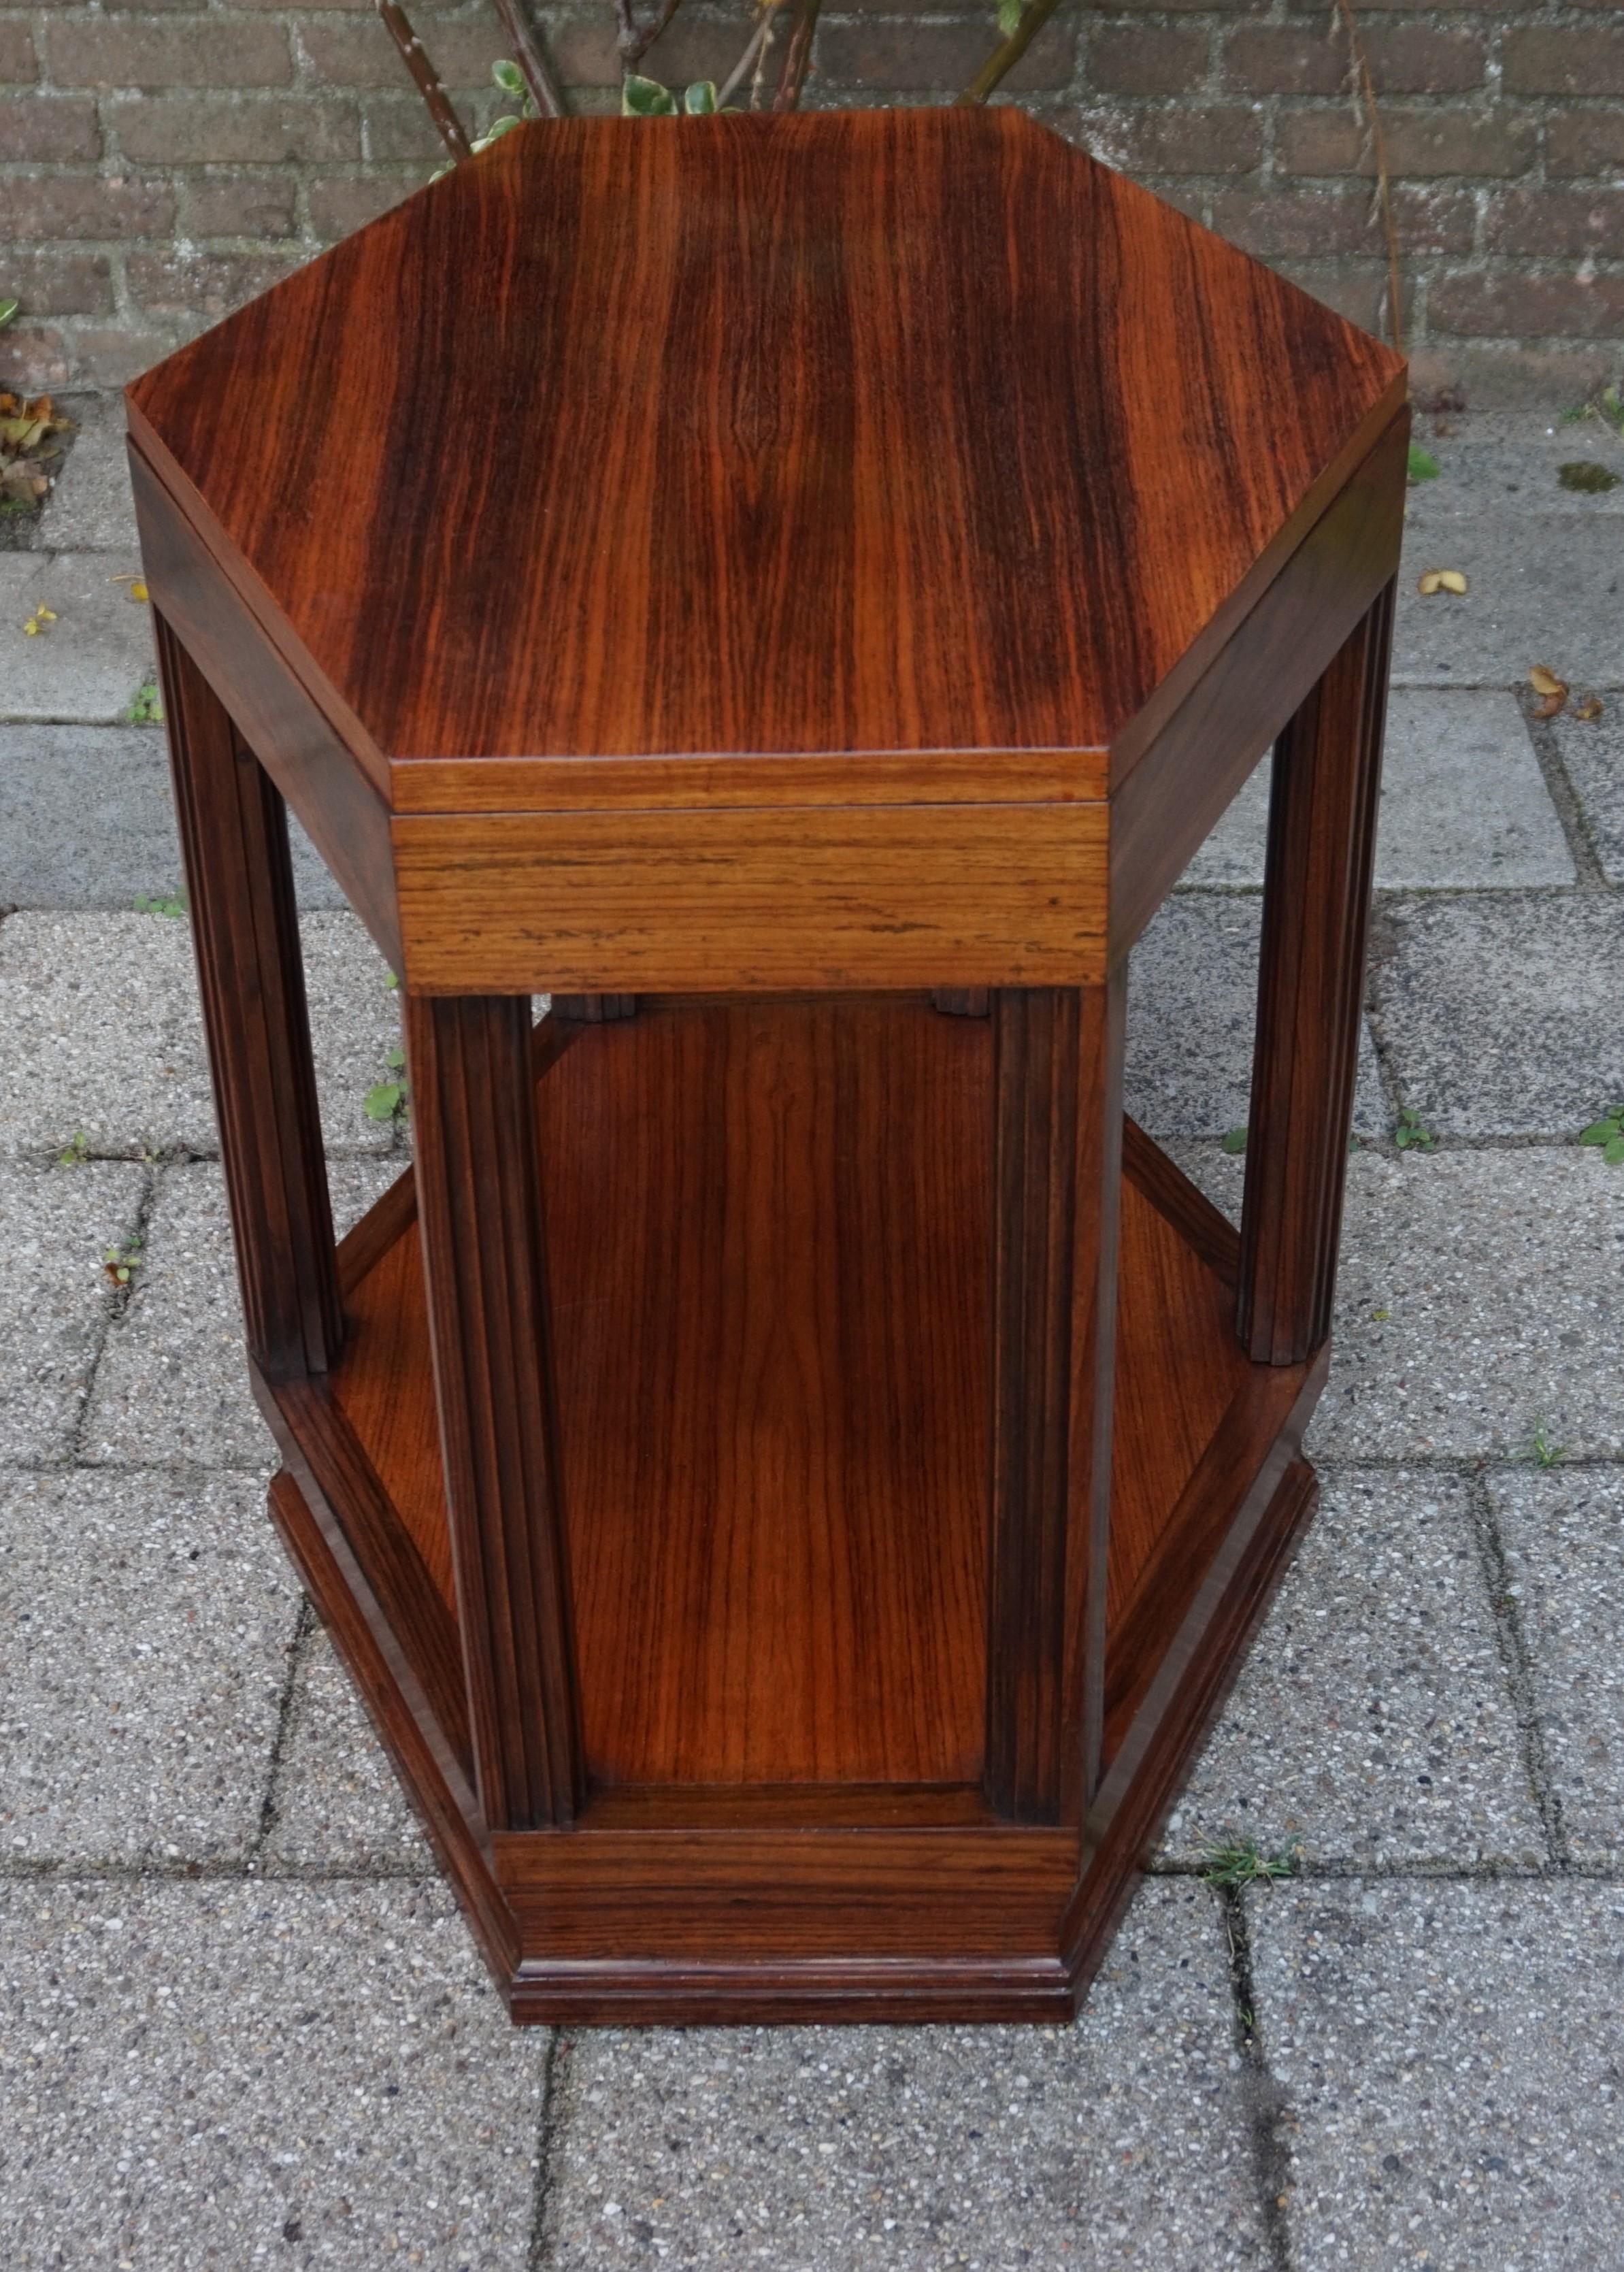 Dutch Stunning and Excellent Condition Coromandel Art Deco Coffee or Sofa Table 1920 For Sale